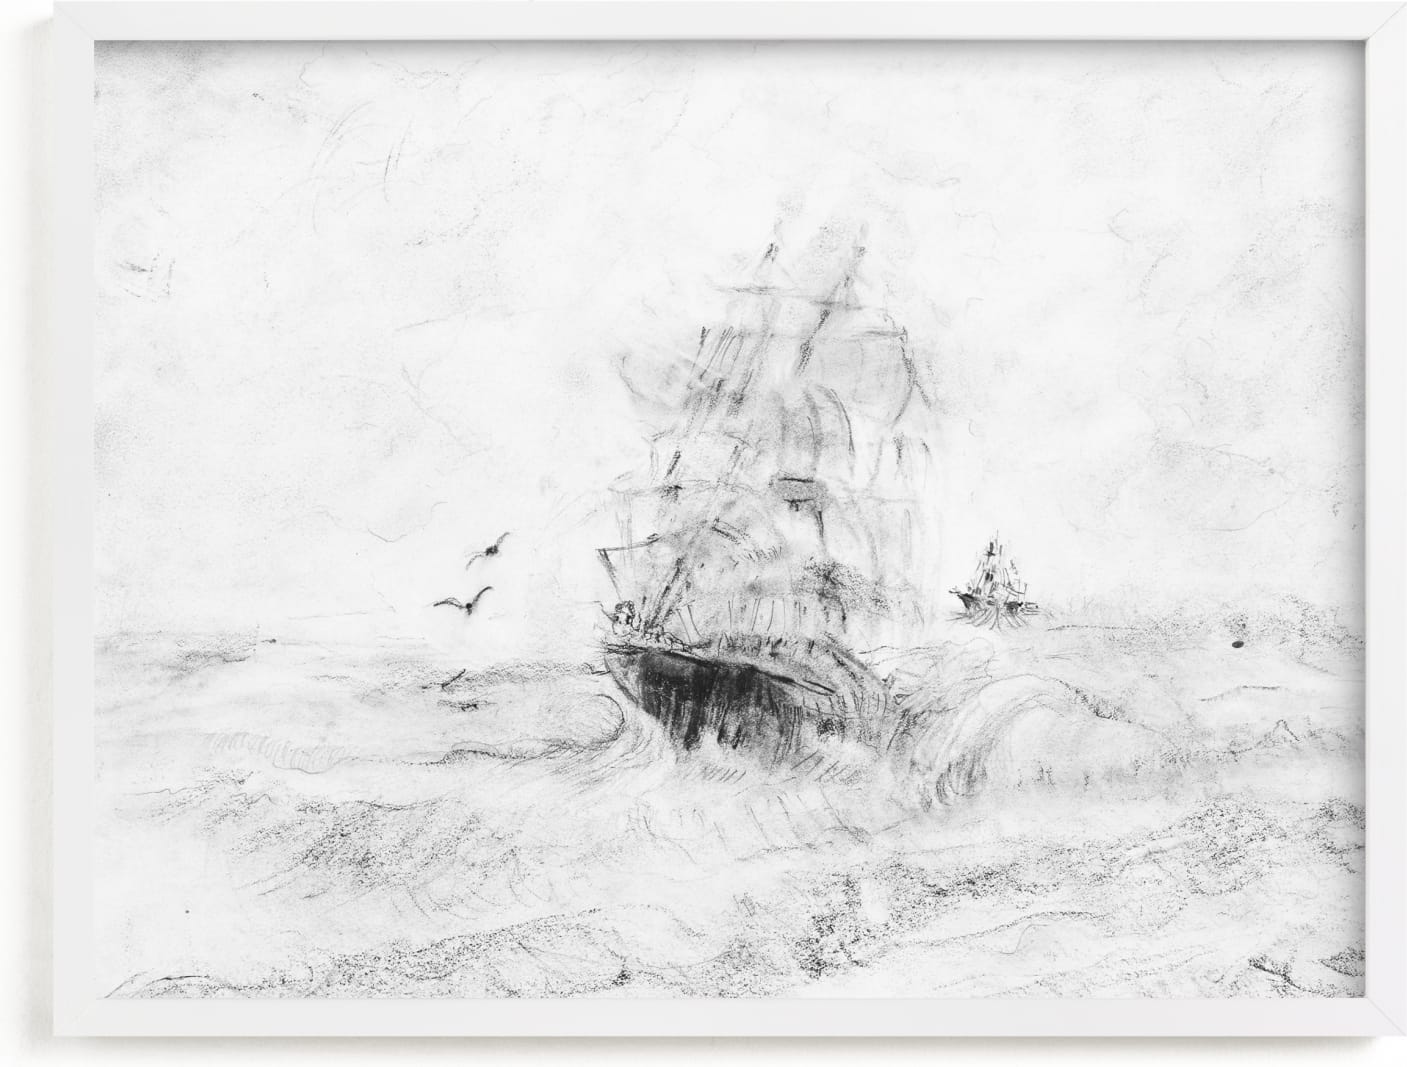 This is a black and white art by Ramnik Velji called Seaworthy.